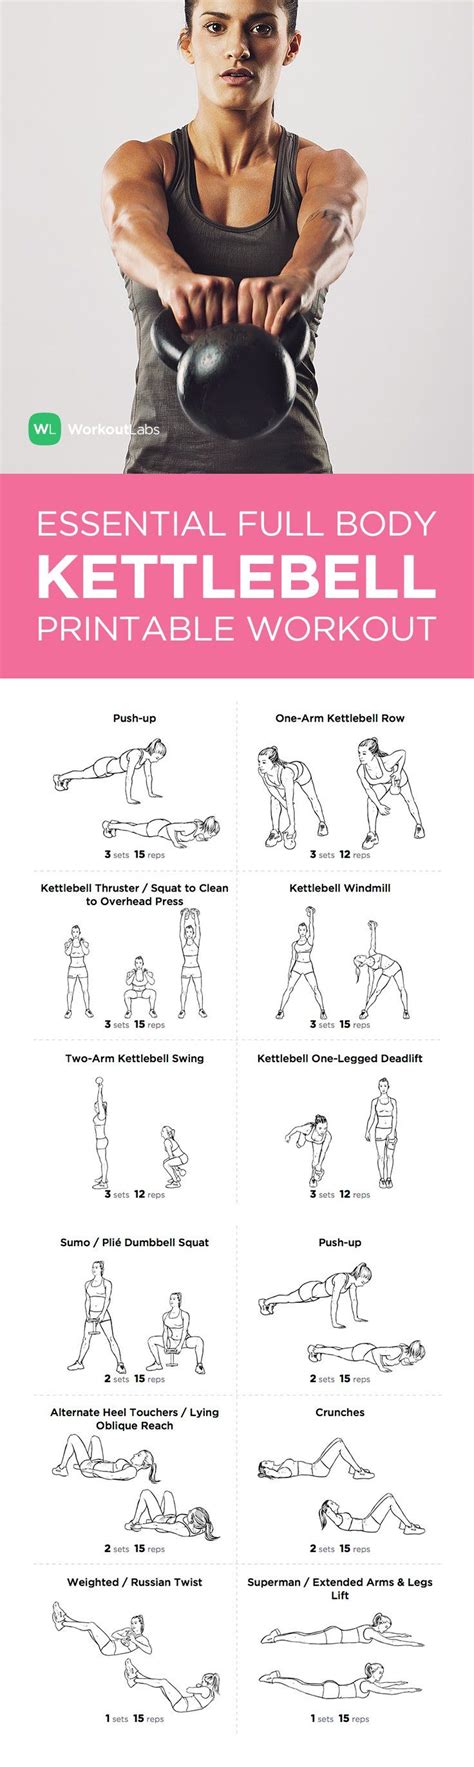 printable workouts kettlebell and full body on pinterest